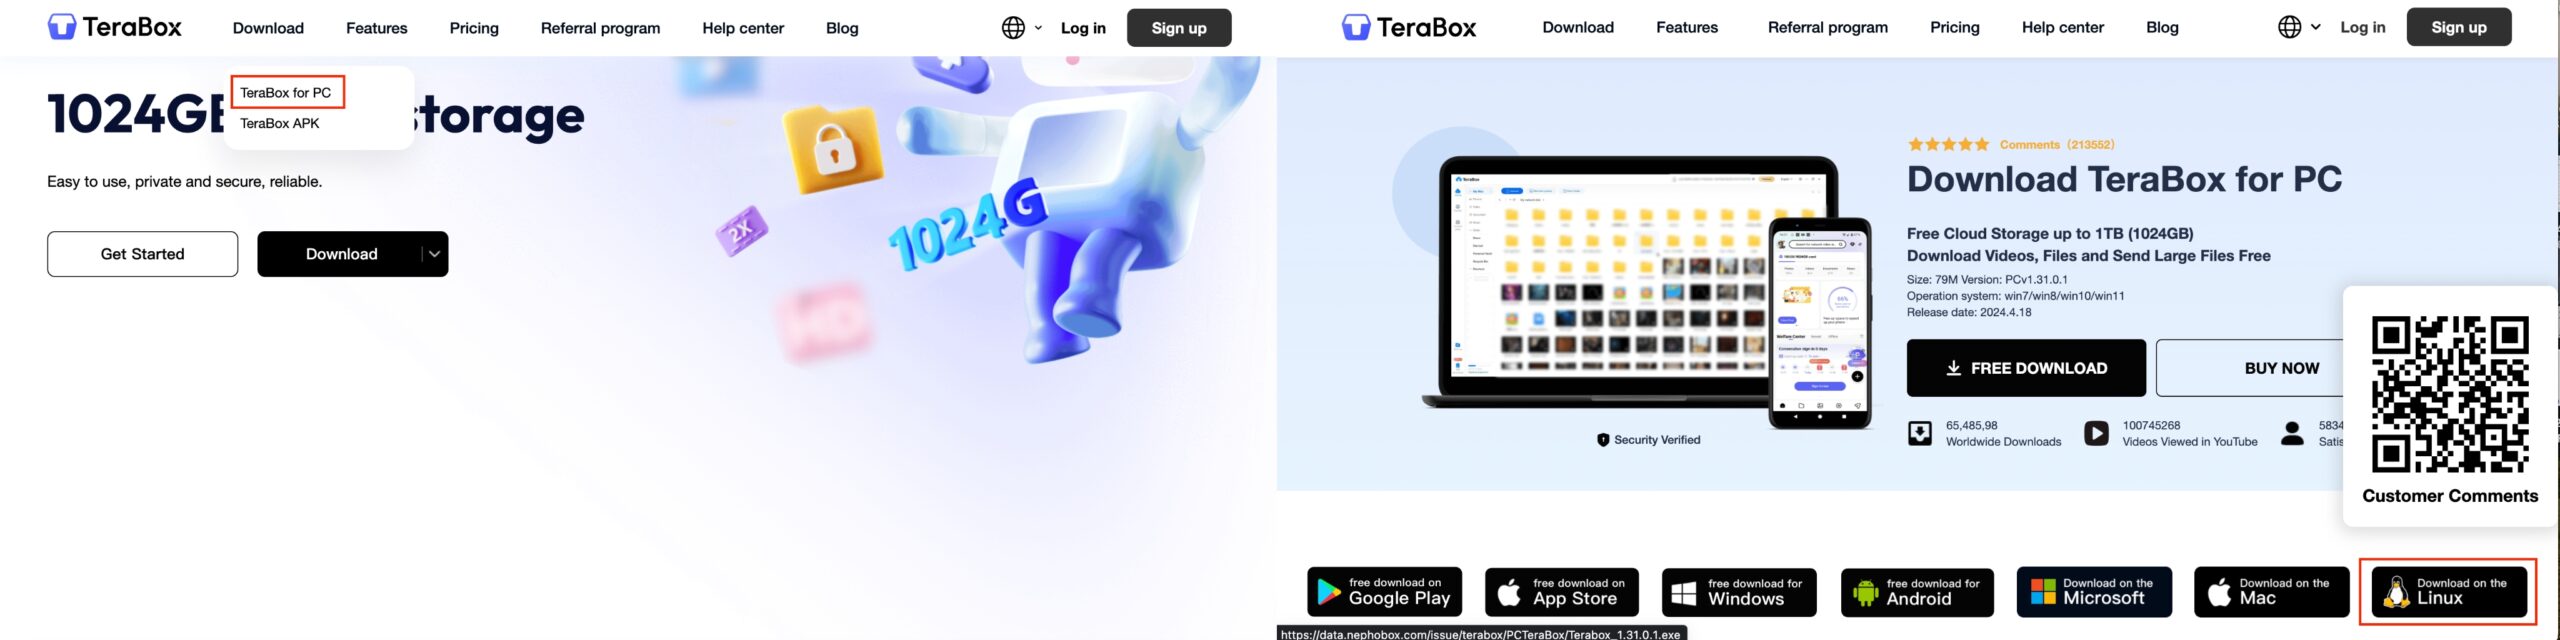 Can I Download TeraBox on Linux?